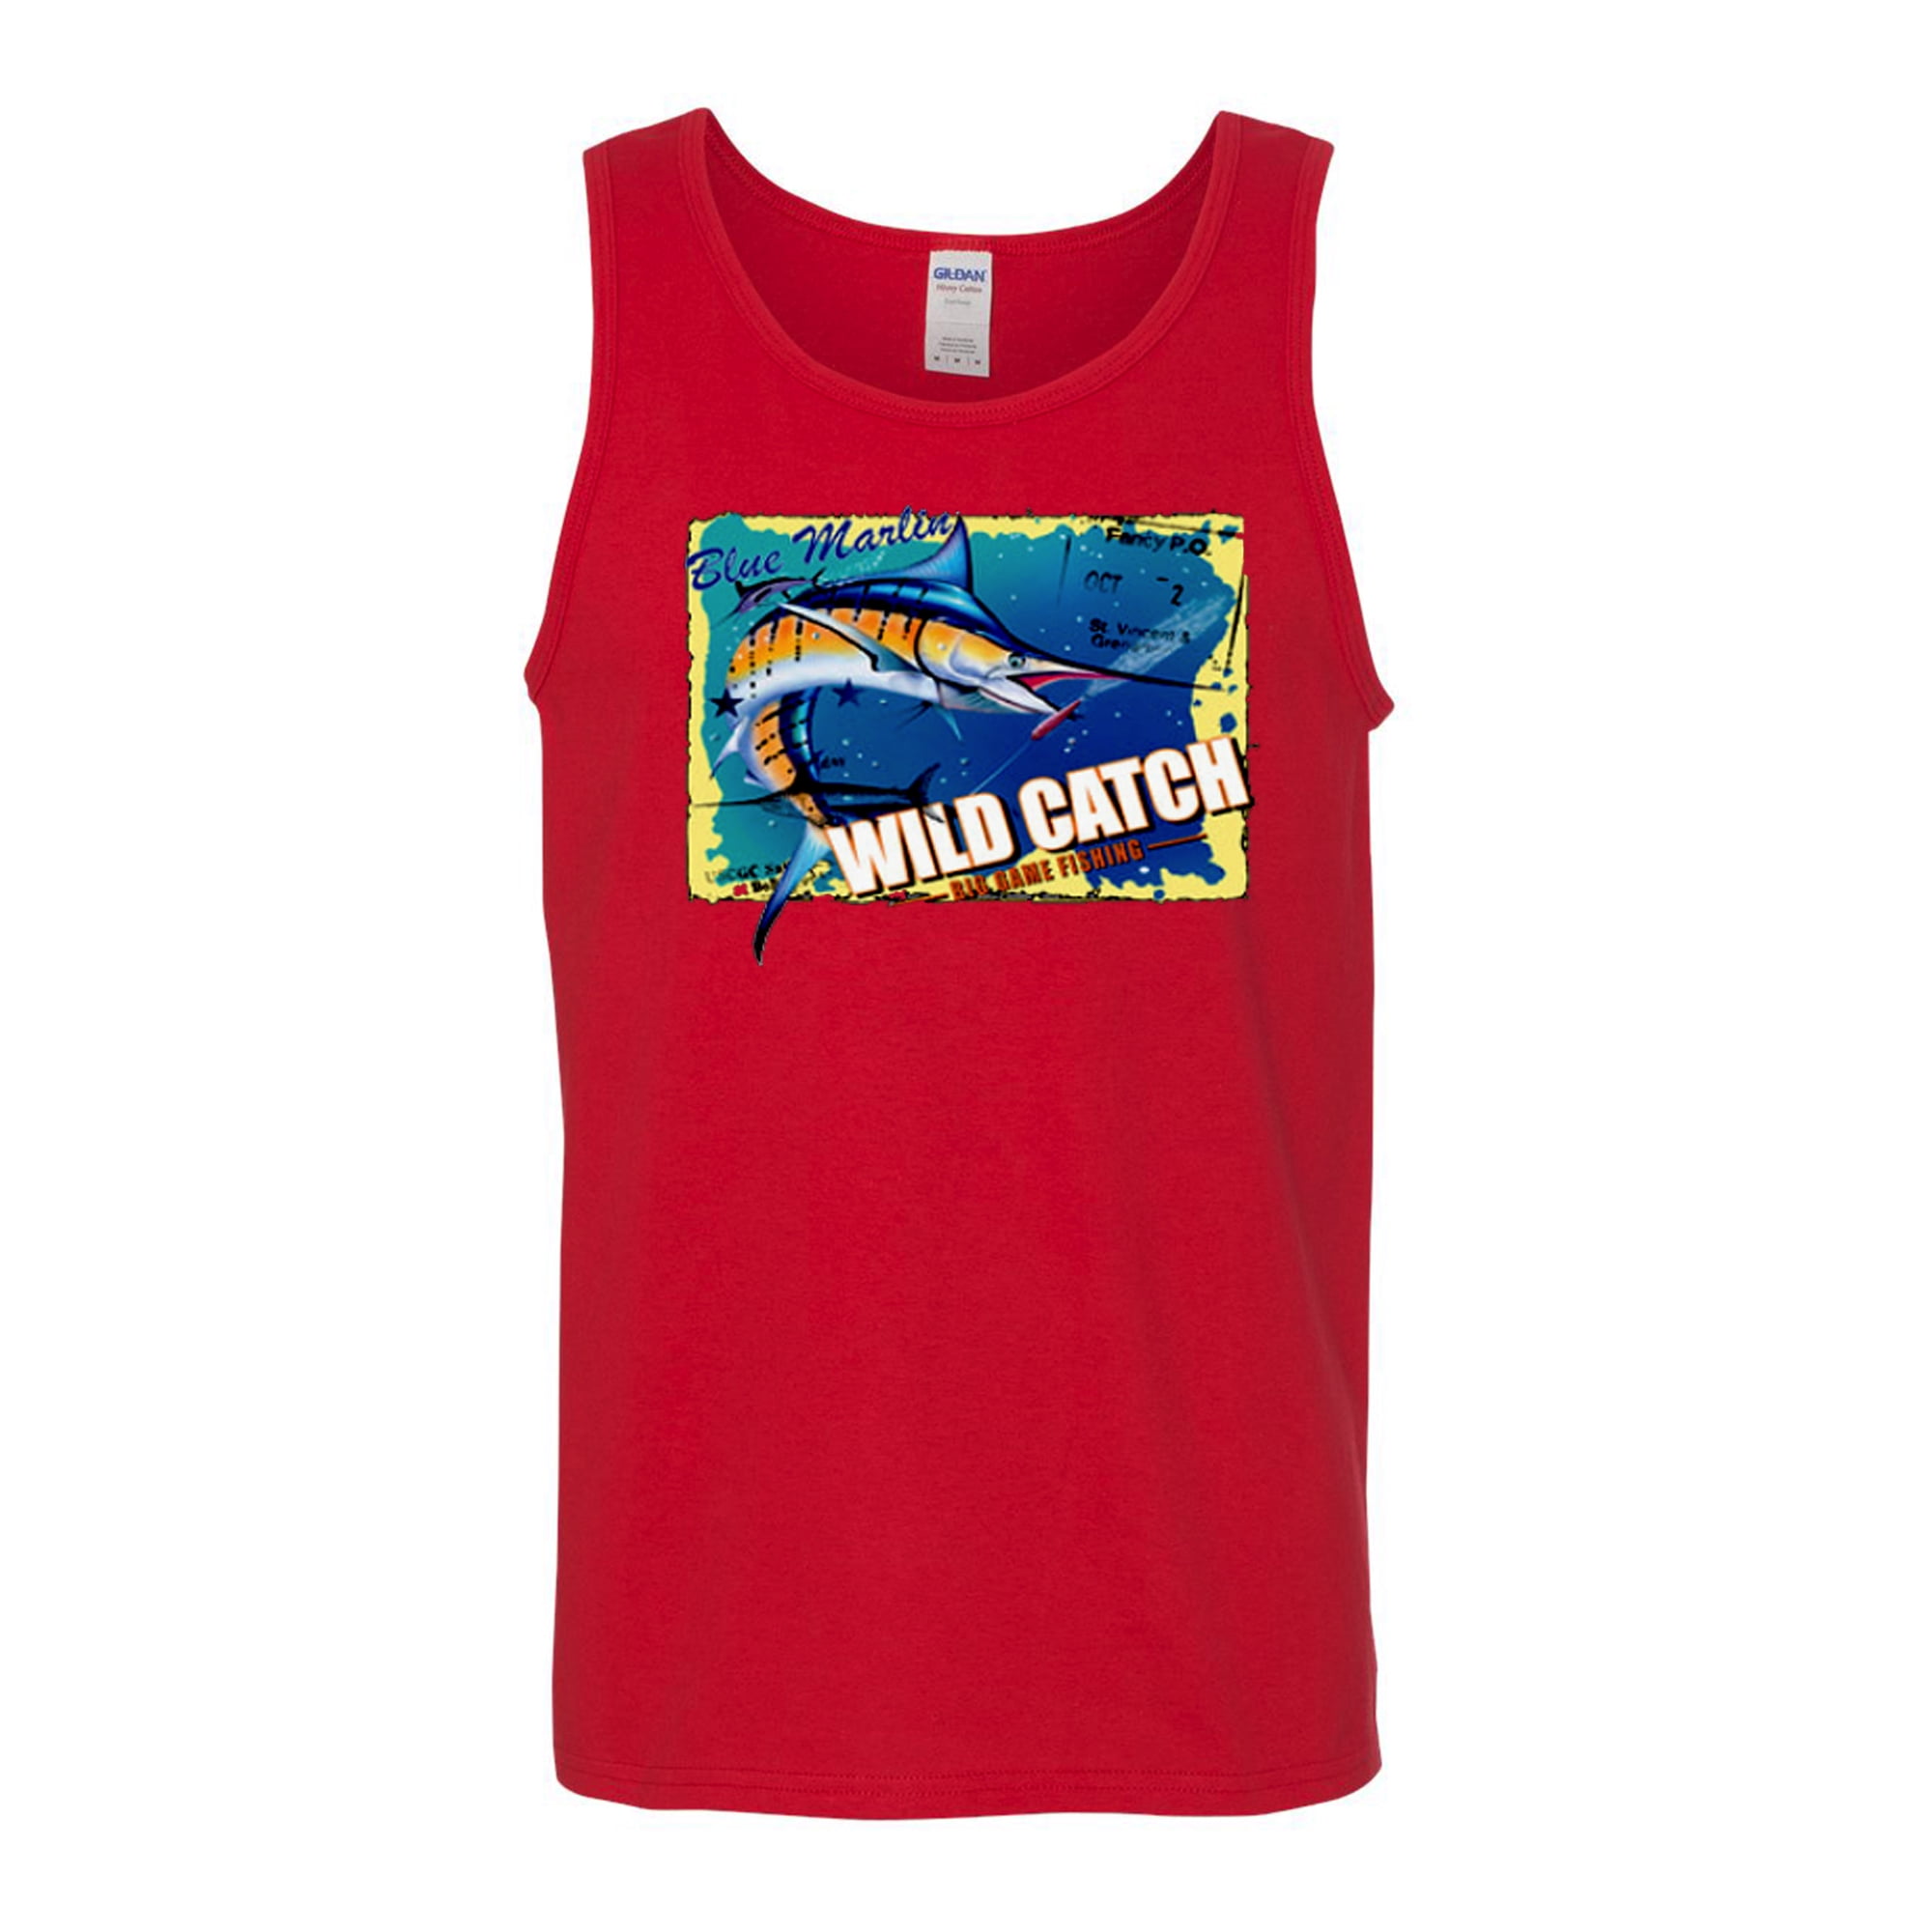 Blue Marlin Wild Catch Fishing Lovers Mens Tank Top, Red, Large